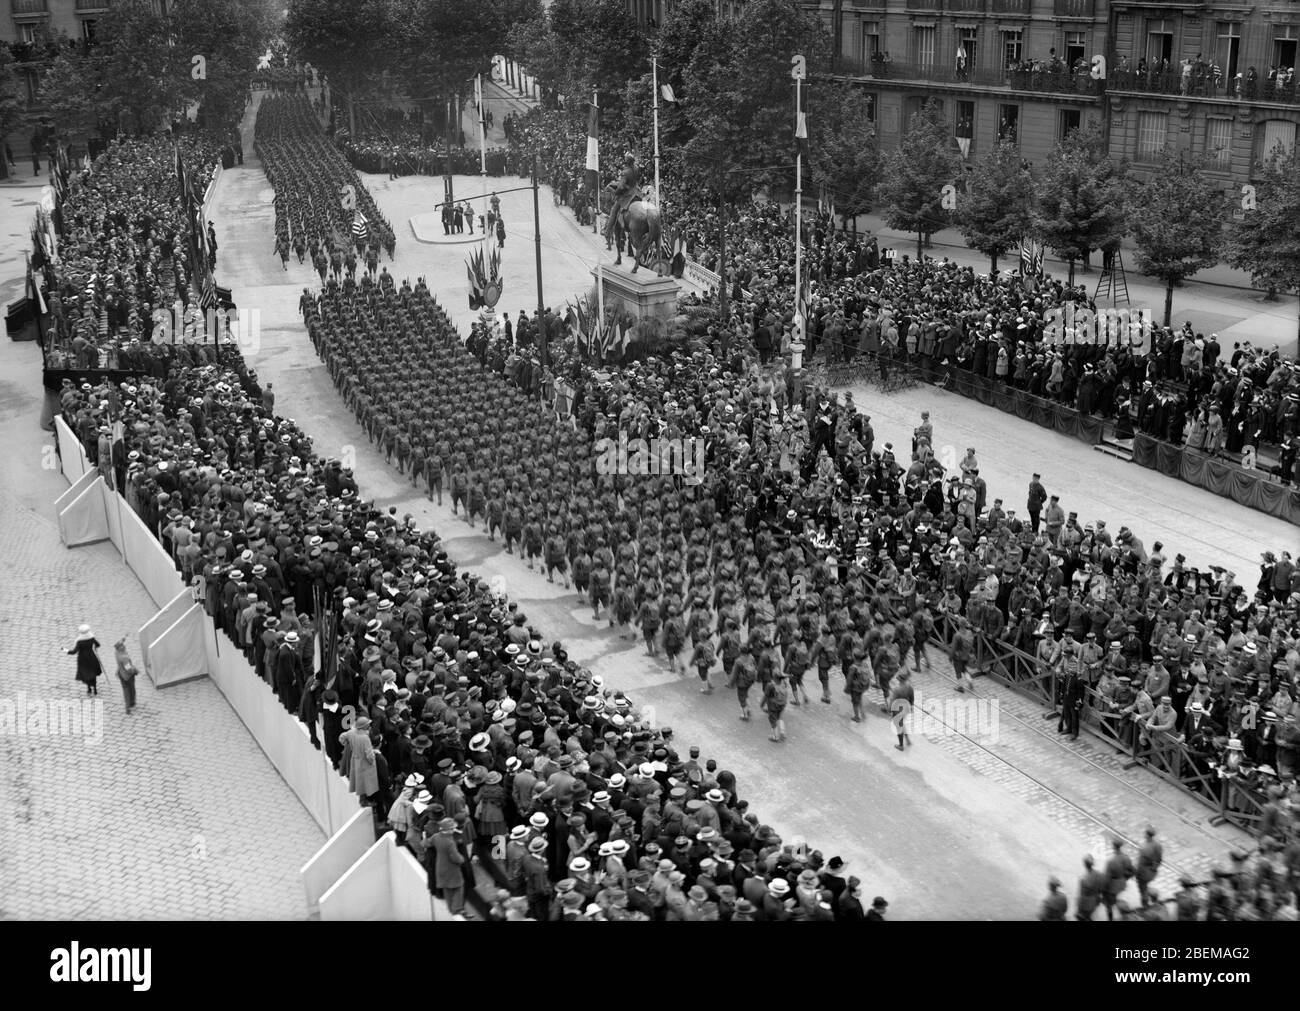 American Troops marching through the Place d'Iena on July 4th, 1918, when all Paris joined in celebrating the American Independence Day, Paris, France, Lewis Wickes Hine, American National Red Cross Photograph Collection Stock Photo